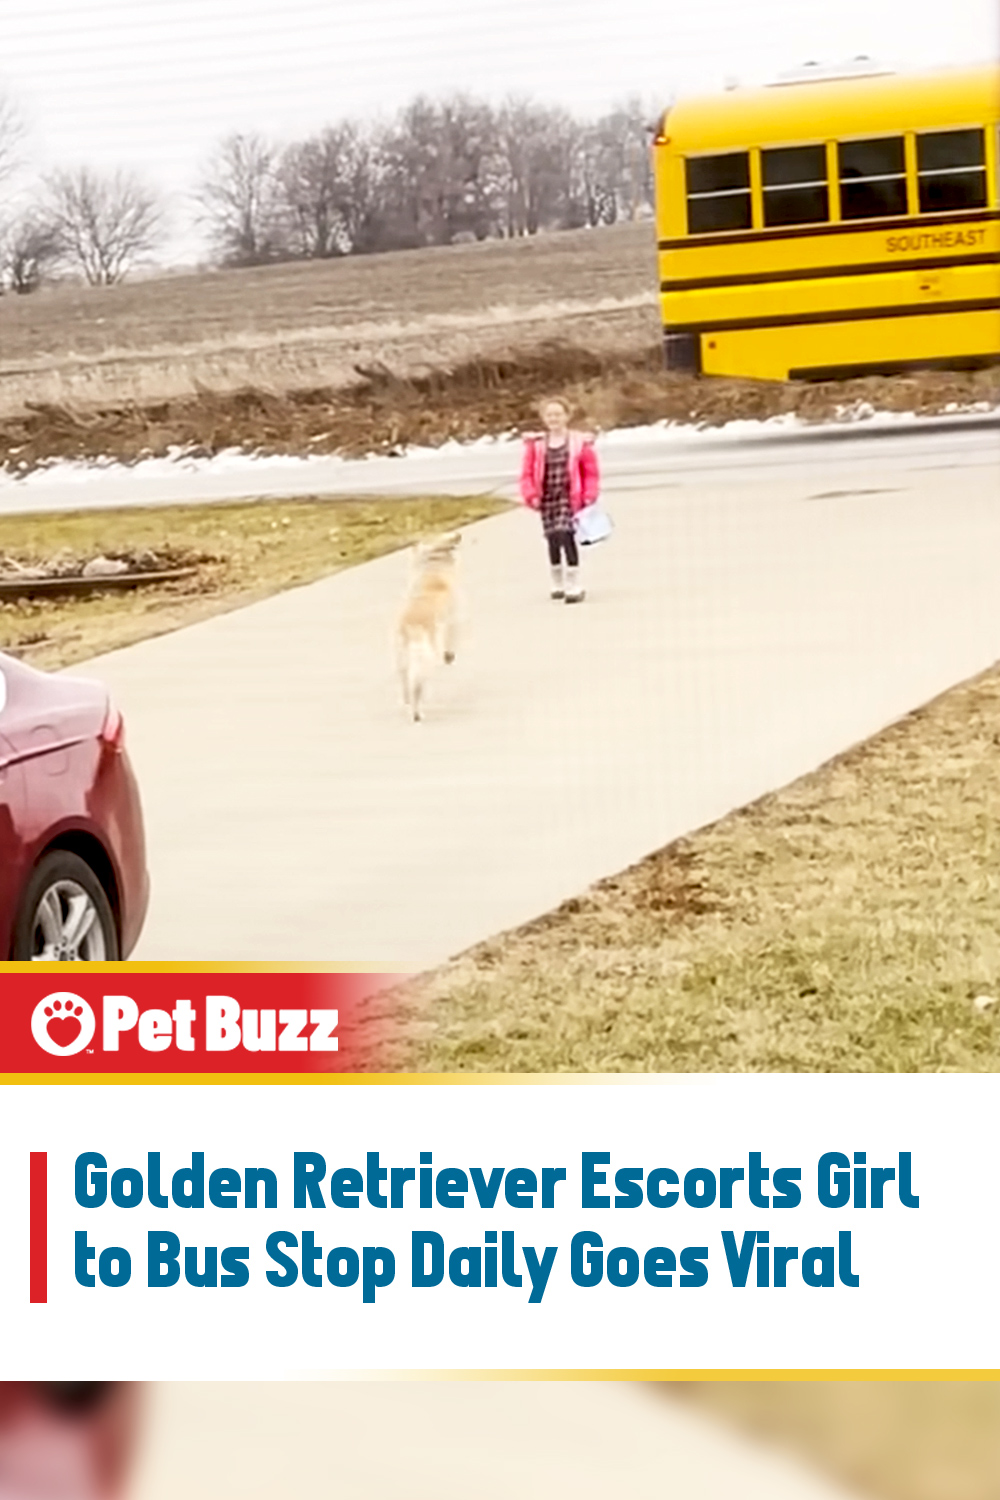 Golden Retriever Escorts Girl to Bus Stop Daily Goes Viral